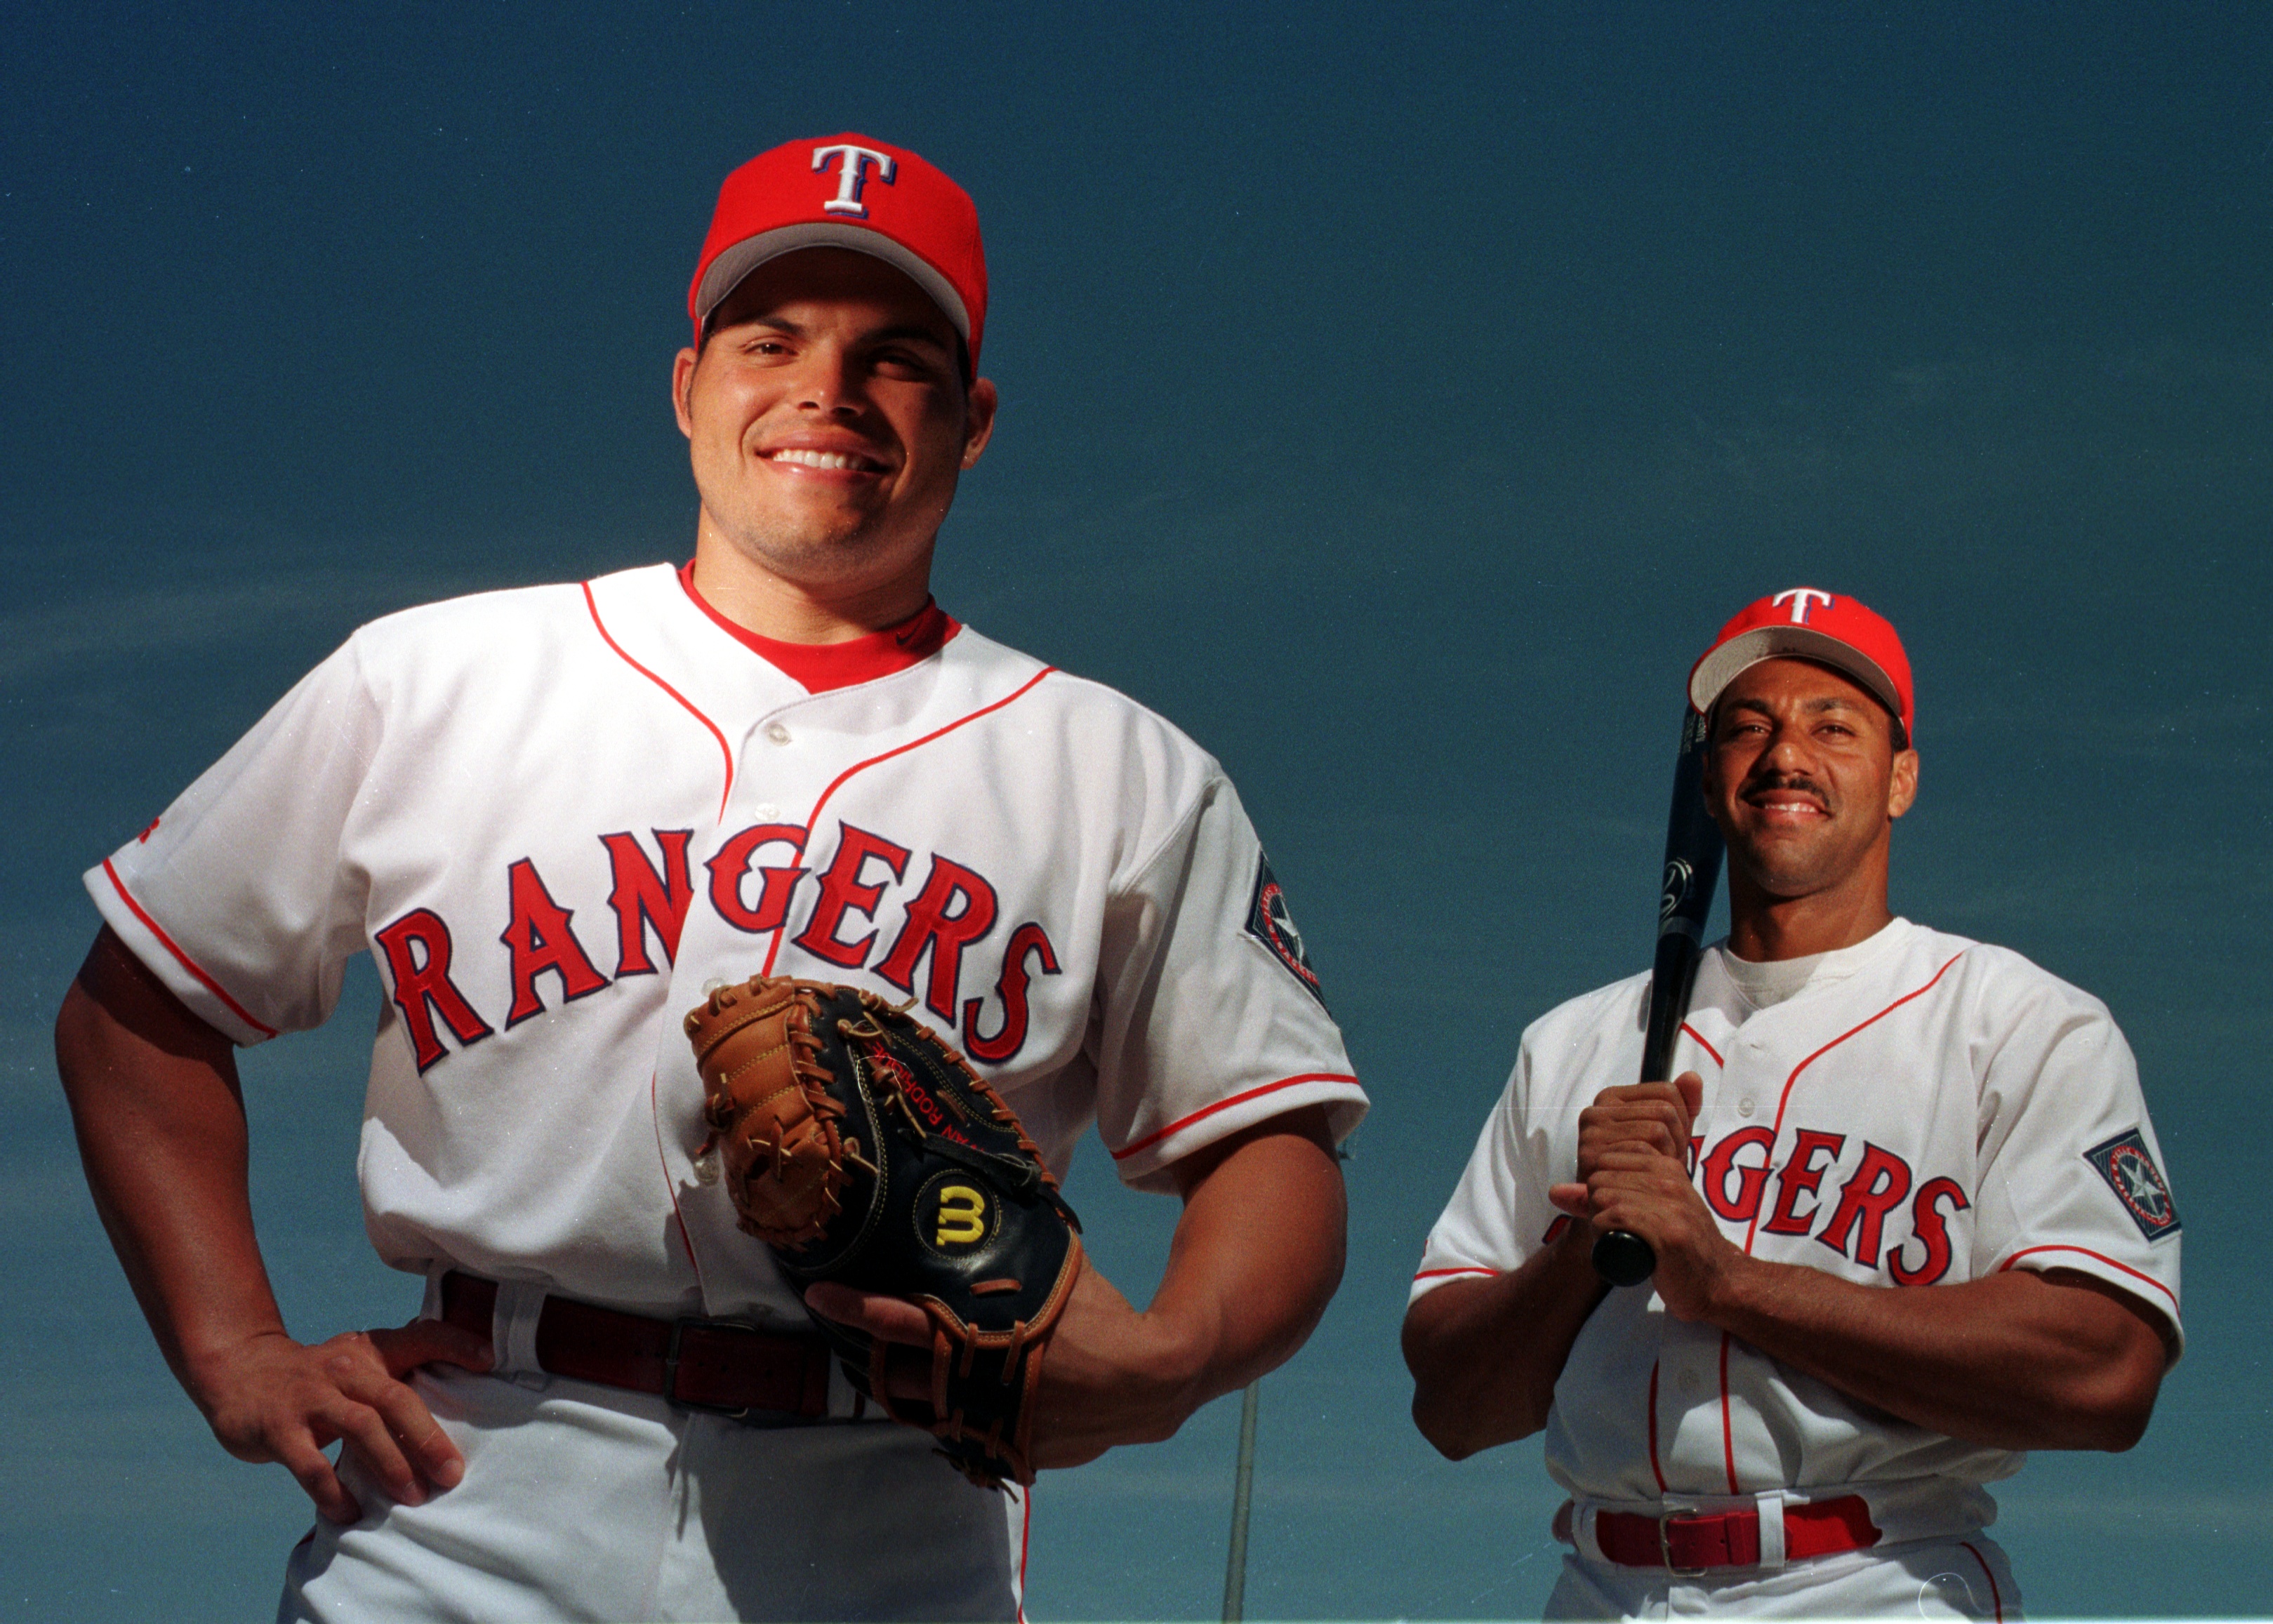 The Life And Career Of Juan Gonzalez (Complete Story)